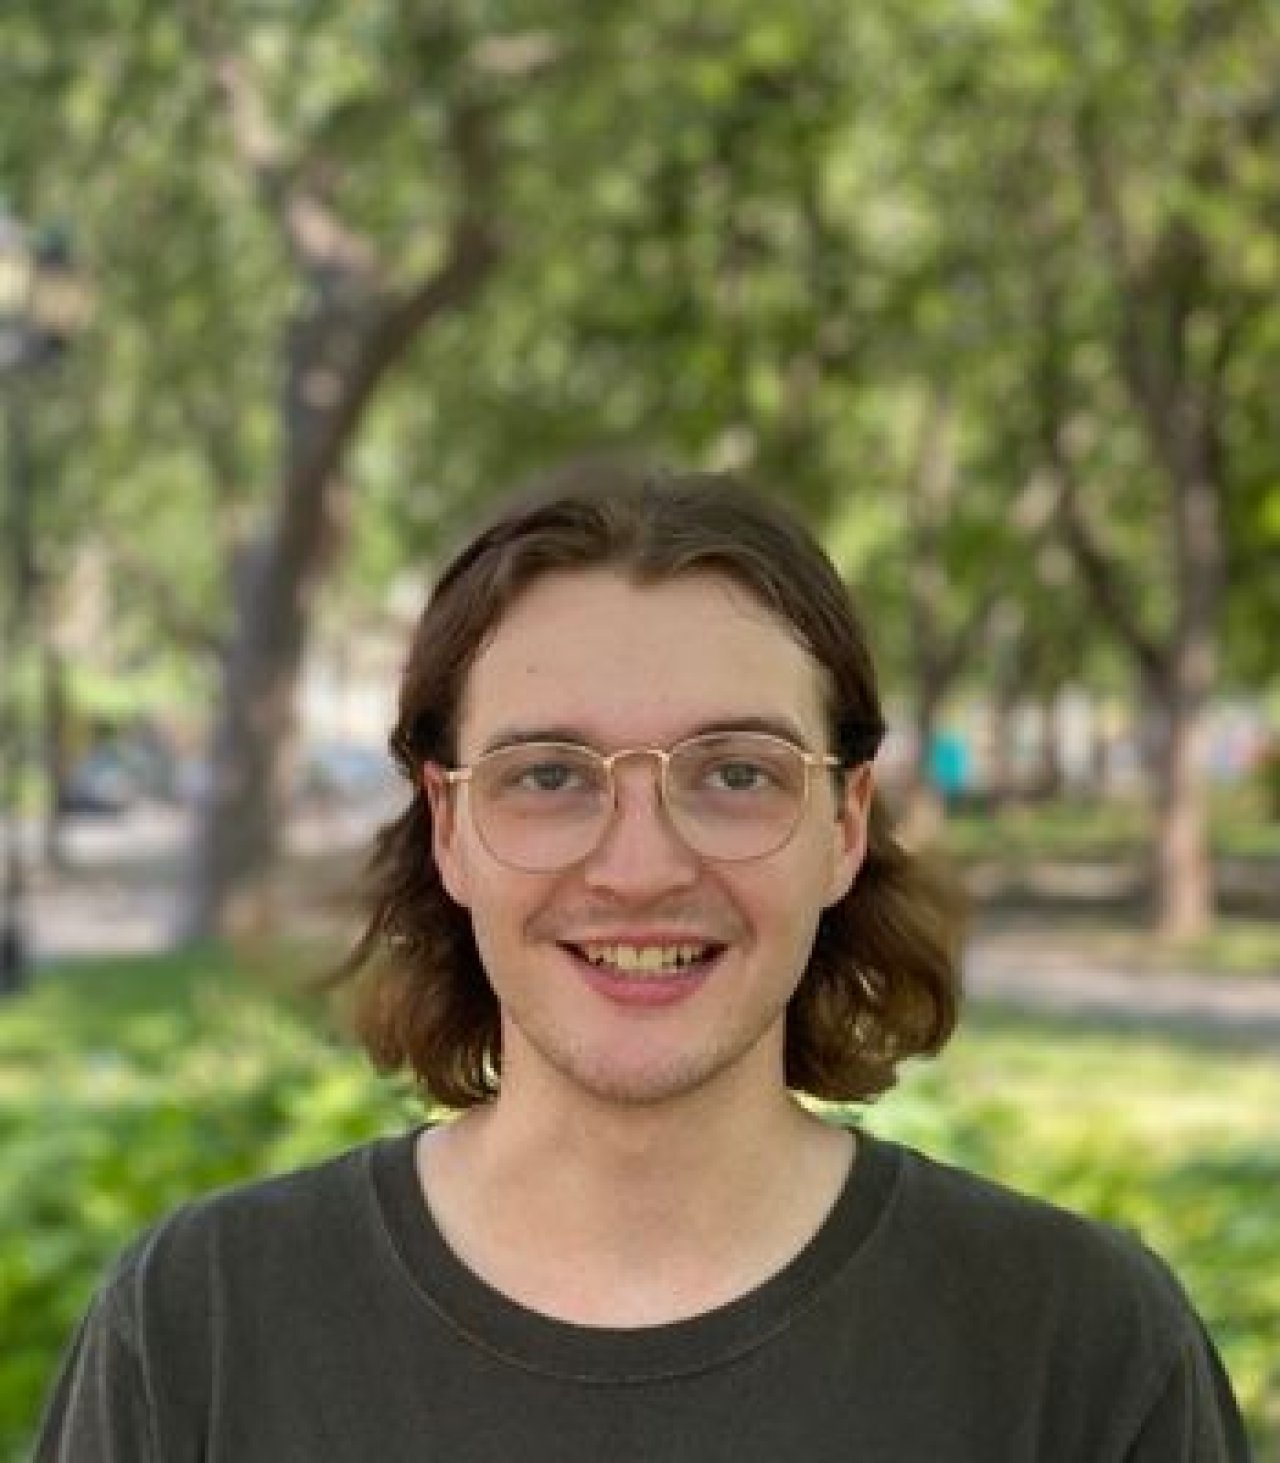 Colby Bilodeau, BSc's profile picture